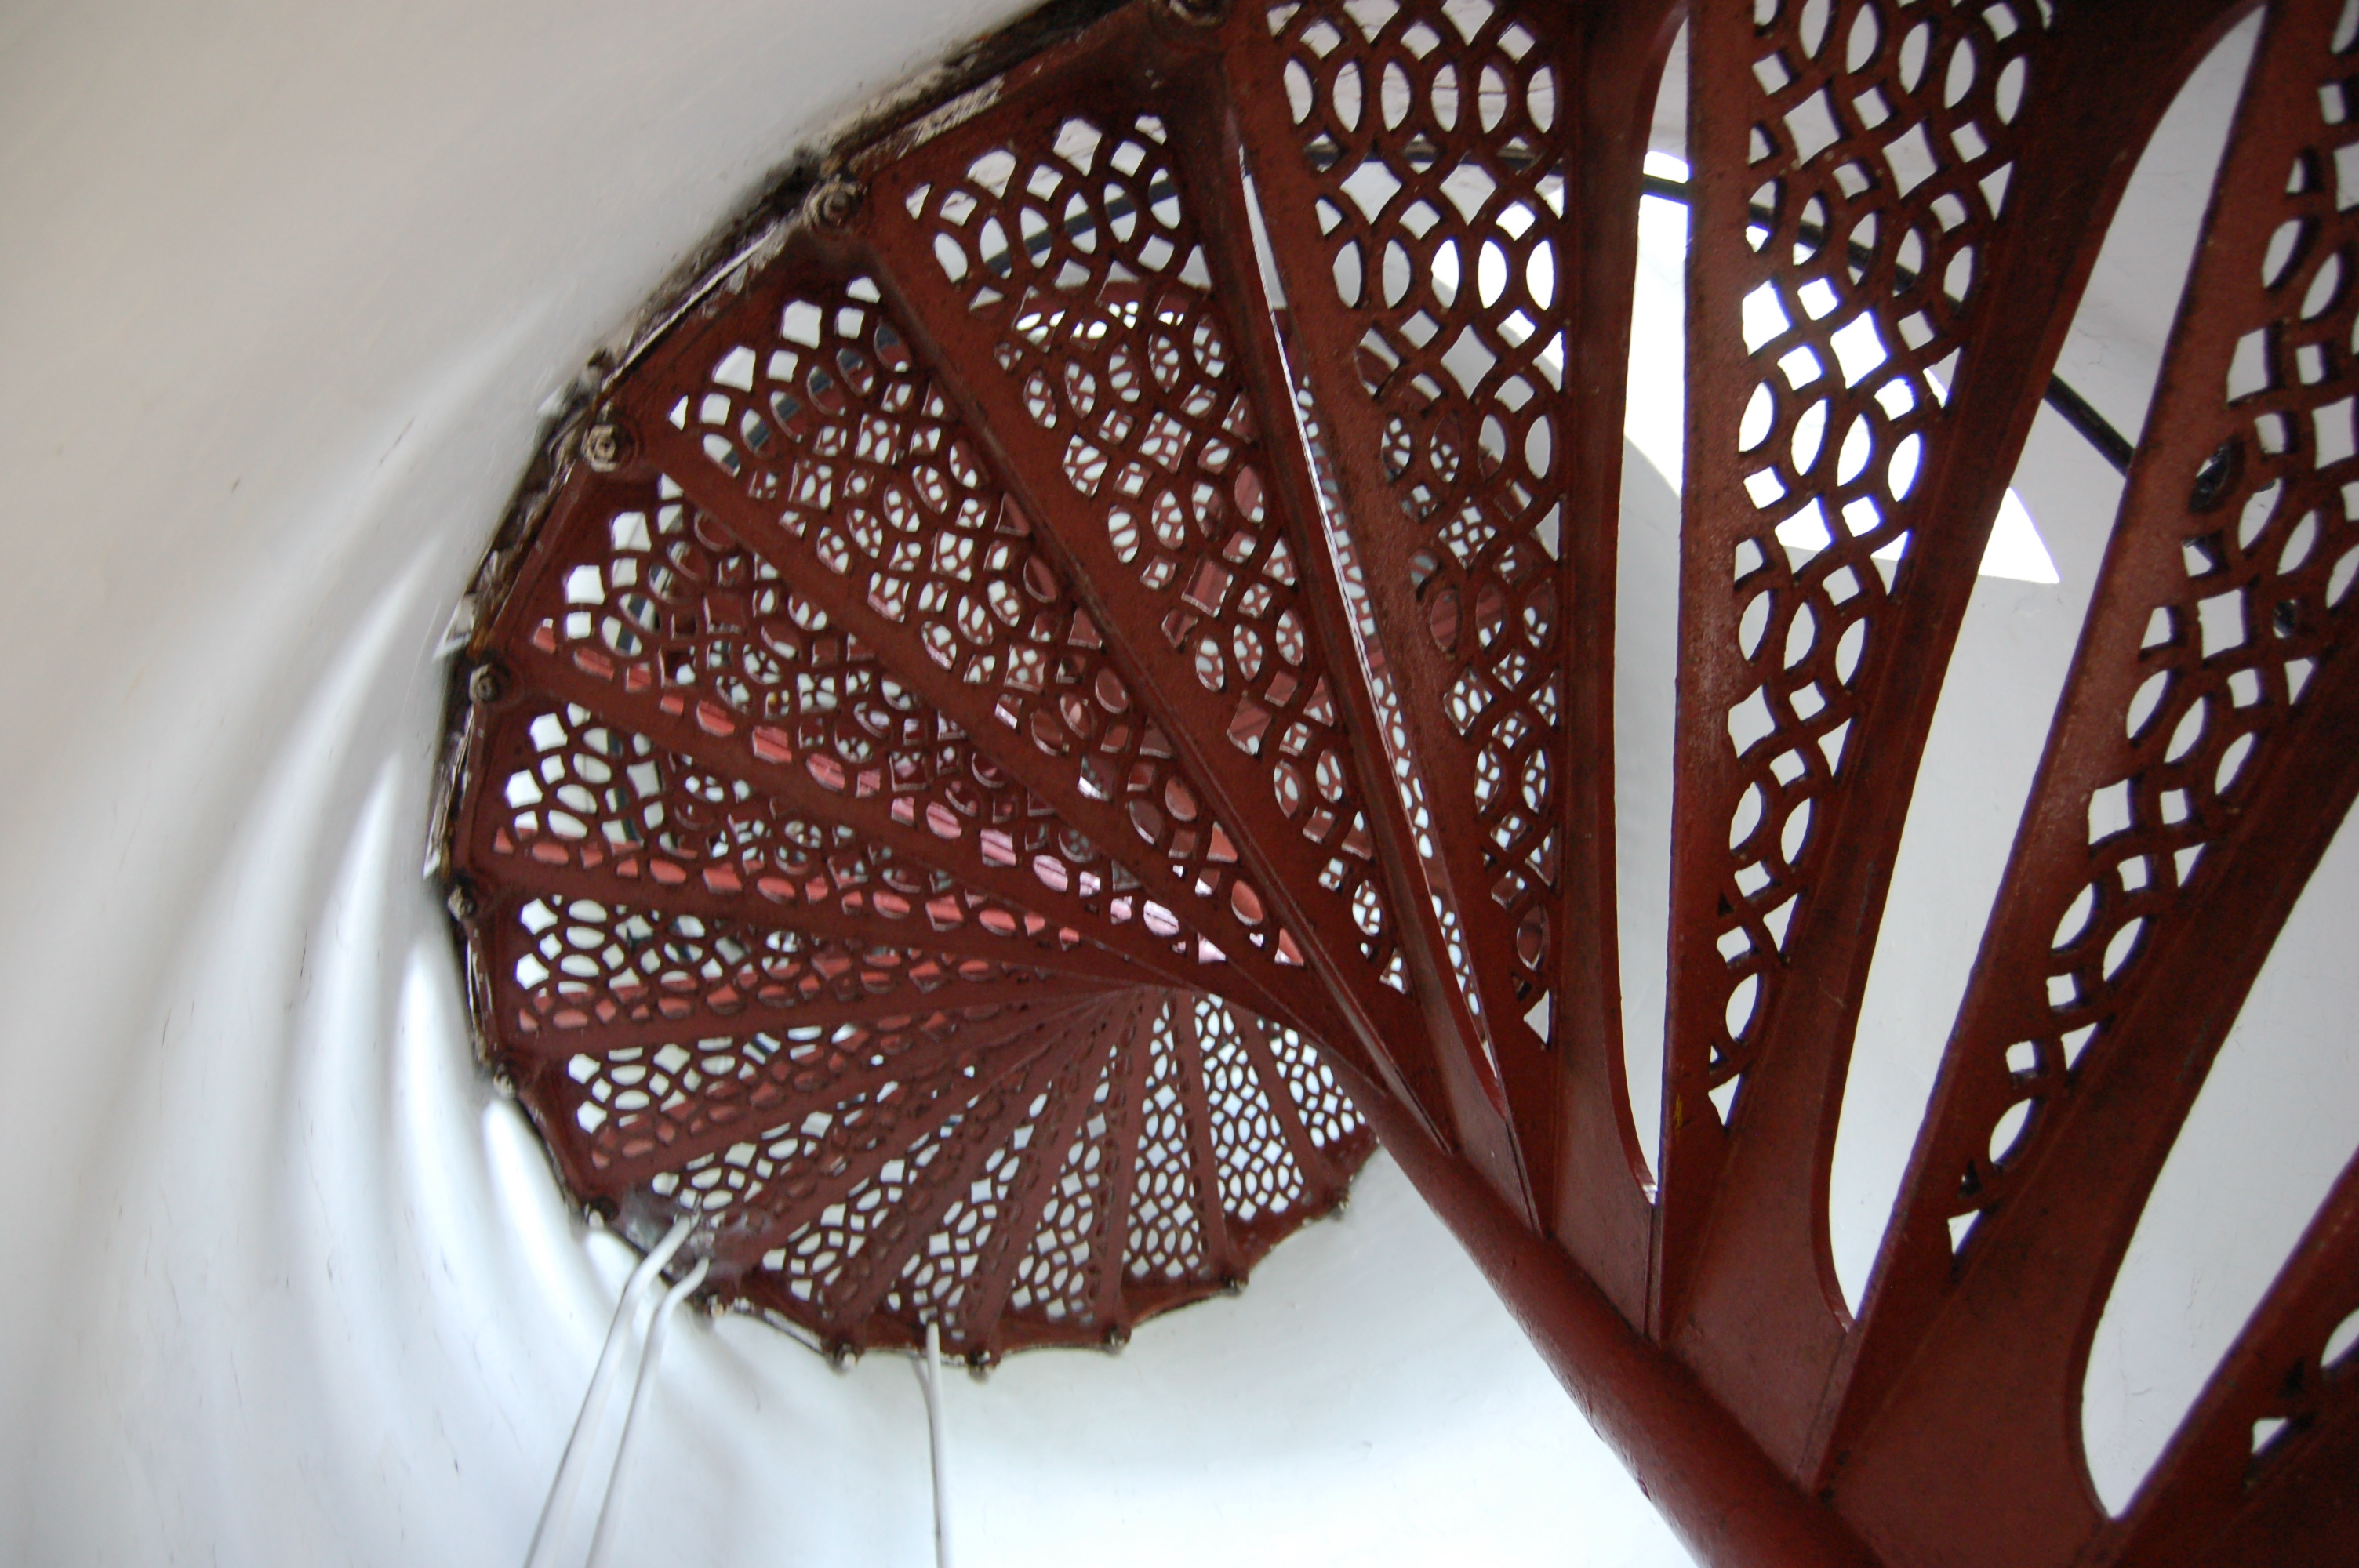 Eagle Harbor Lighthouse Tower Staircase